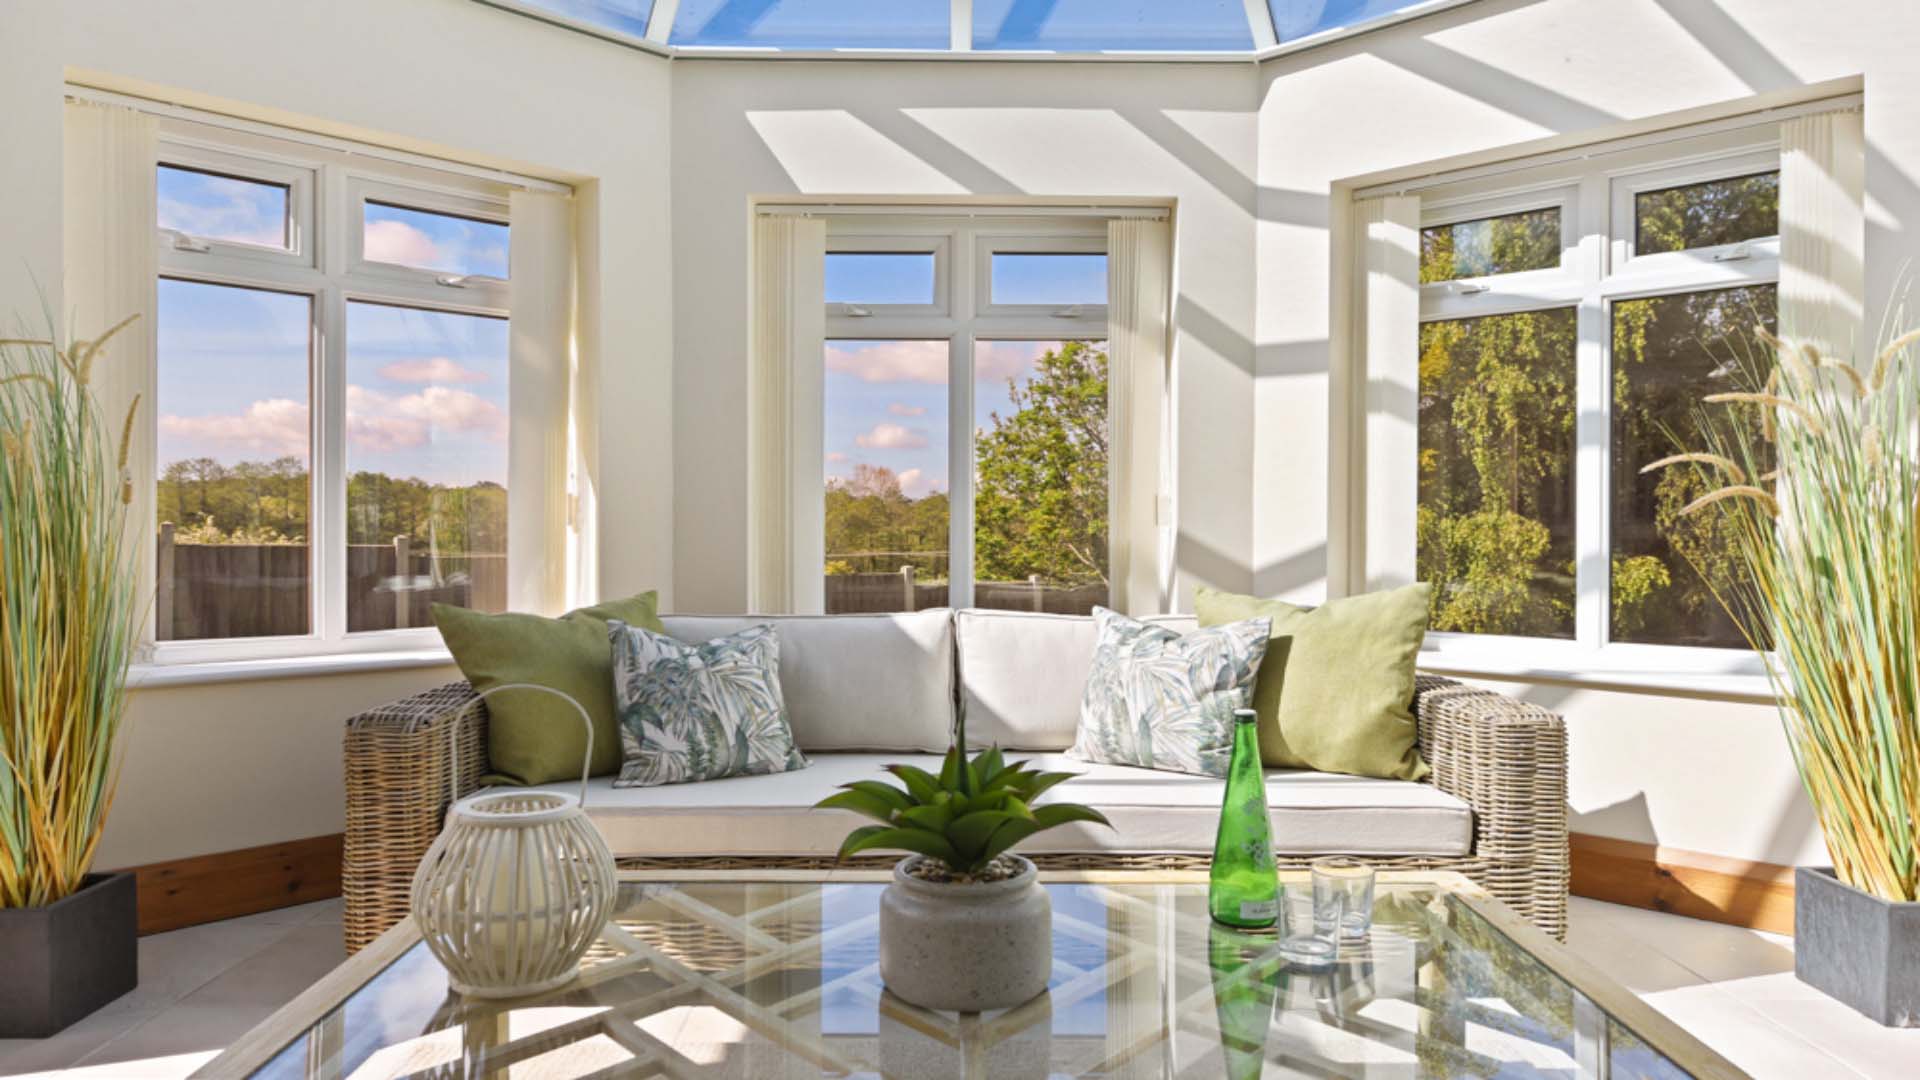 Is conservatory the right name for every design?